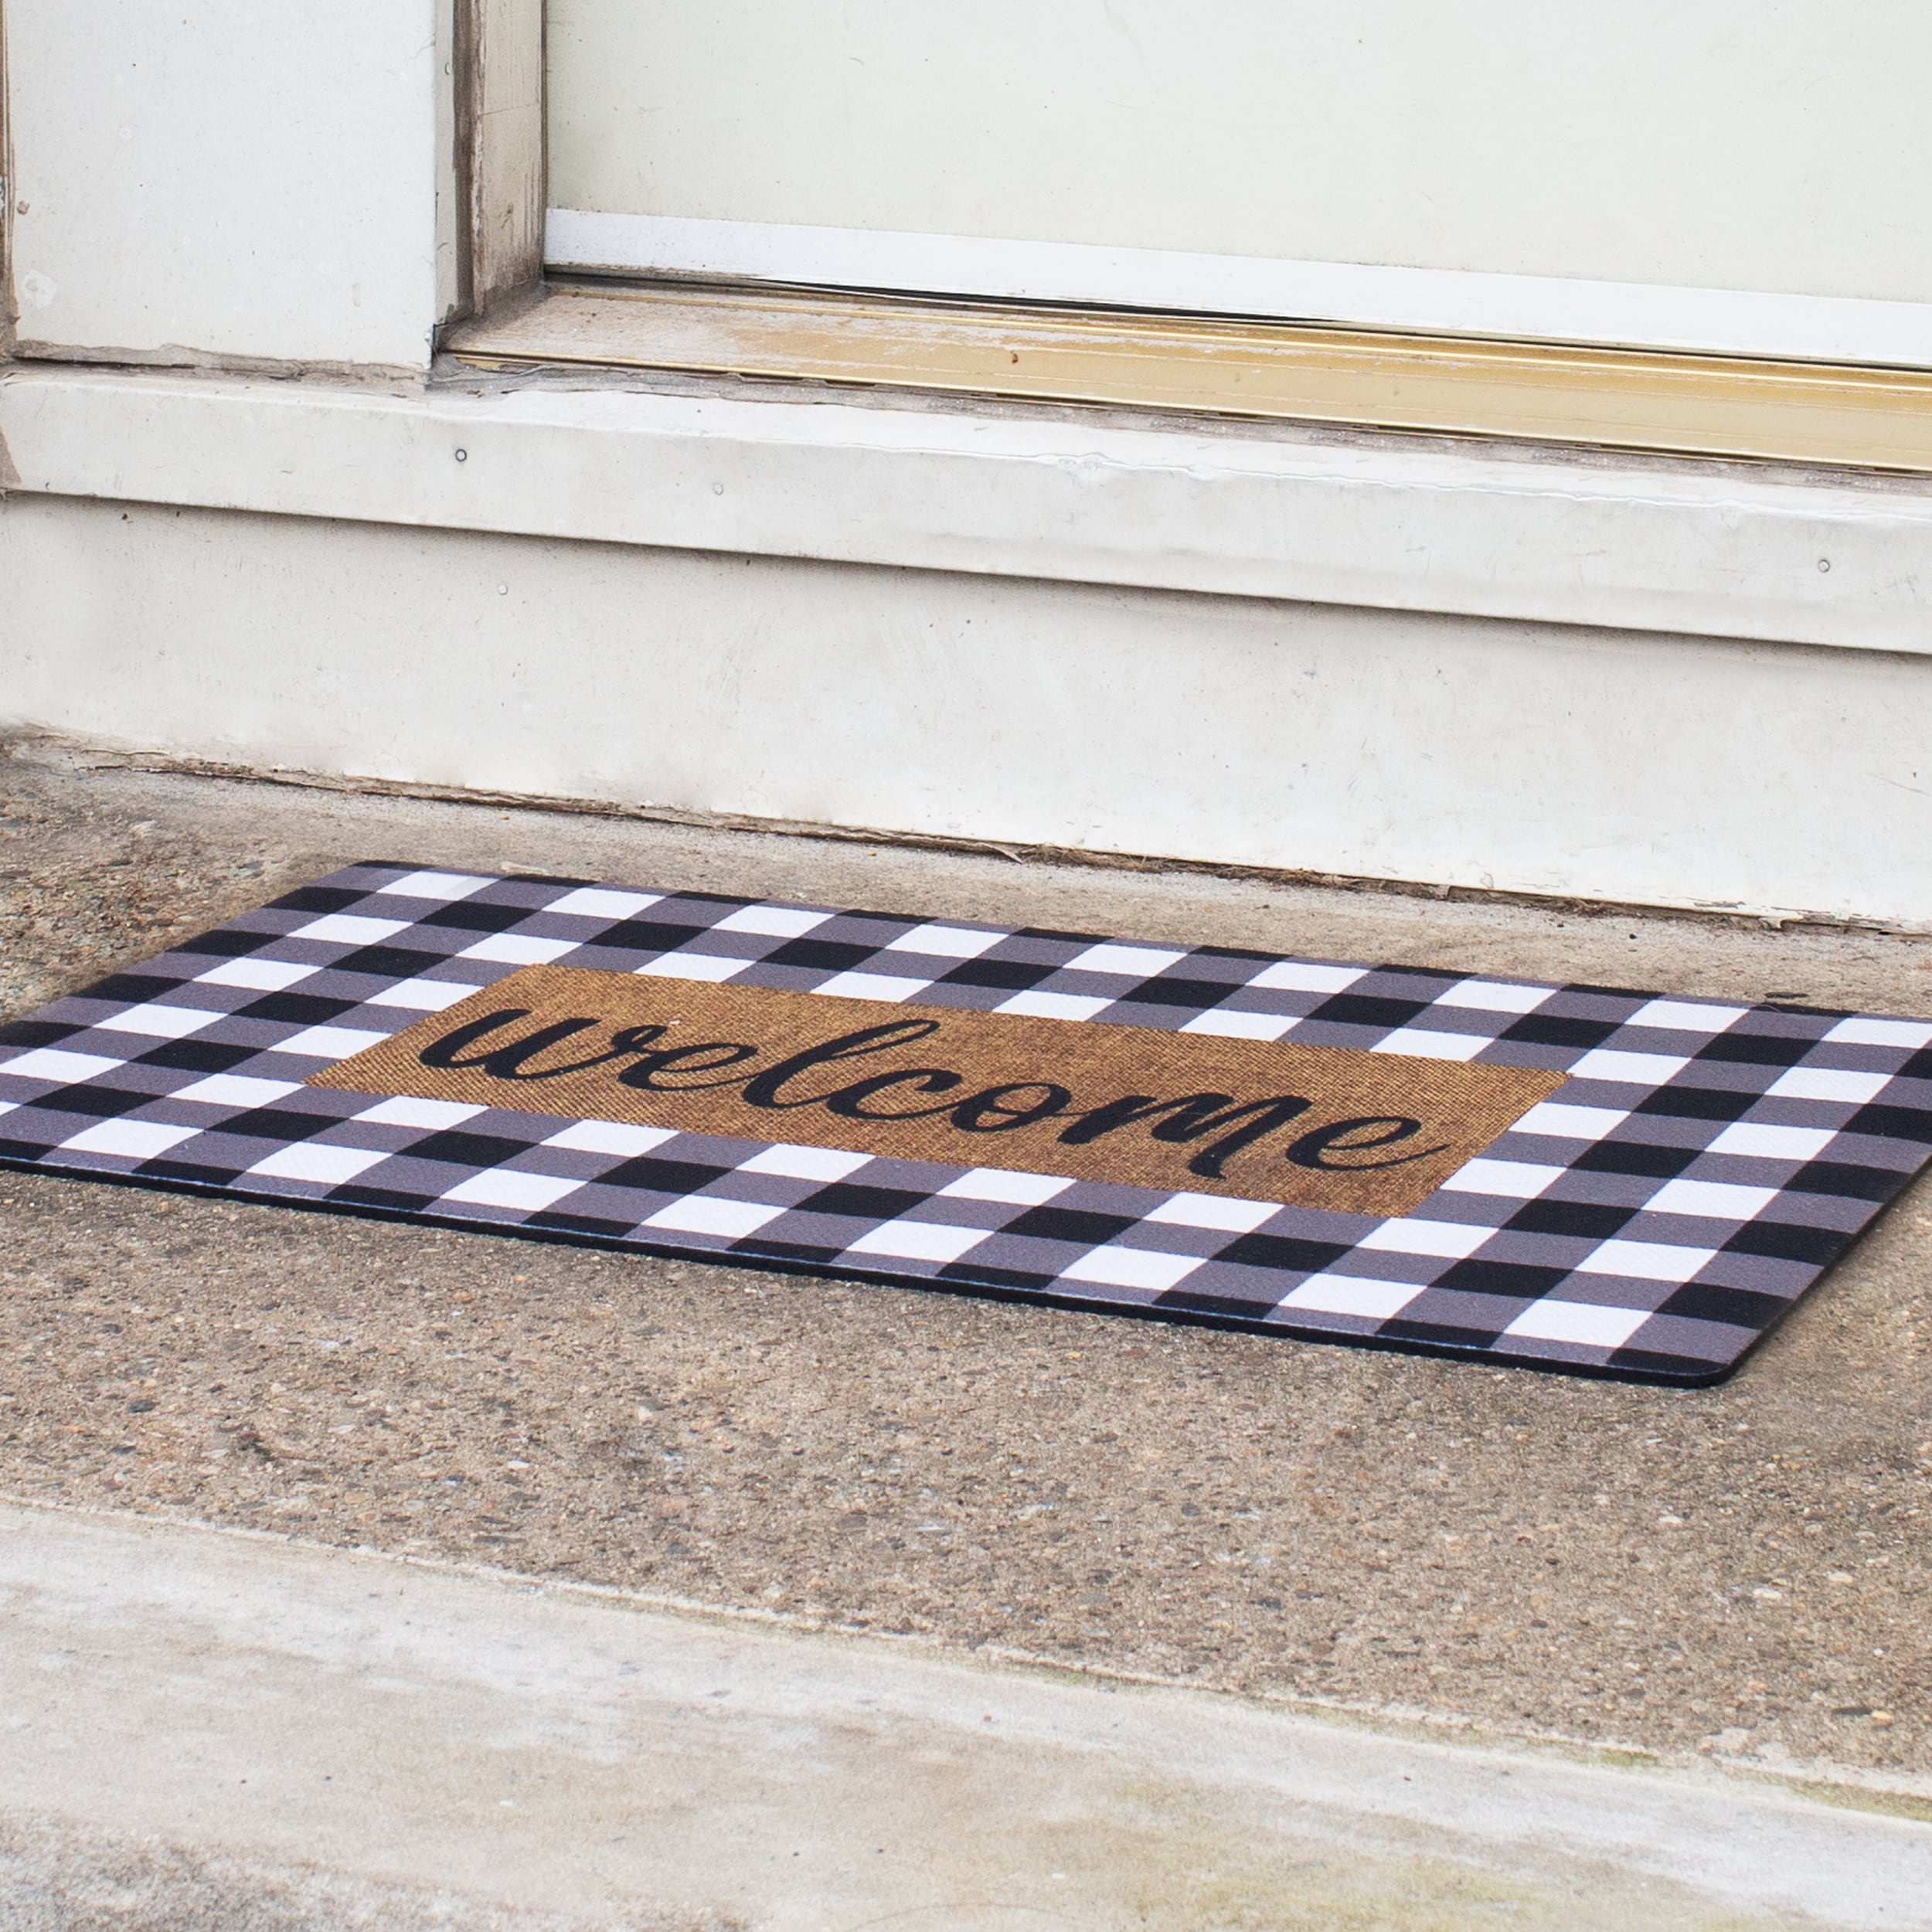 Mind Reader 2-ft x 3-ft Grey Rectangular Indoor or Outdoor Decorative Home  Utility Mat in the Mats department at